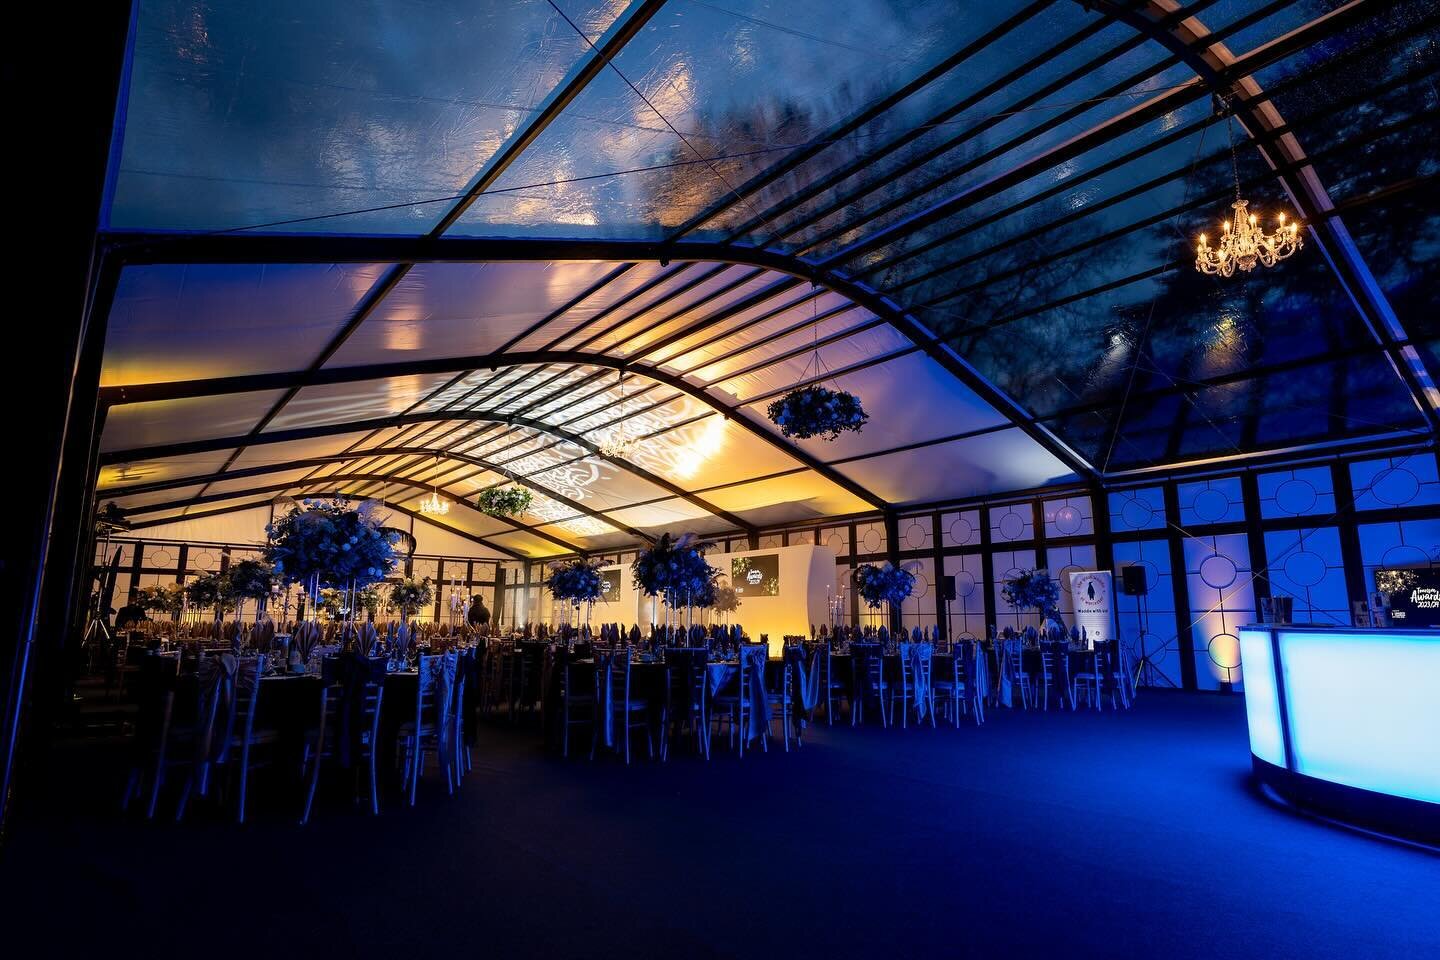 The amazing @FewsMarquees Orangery in action!
Imagine having this for your event 🔥
@fewscorporatemarquees 
&bull;
&bull;
&bull;
&bull;
&bull;
#event #eventphoto #eventphotography #eventphotographer #photography #photographer #photooftheday #photosho